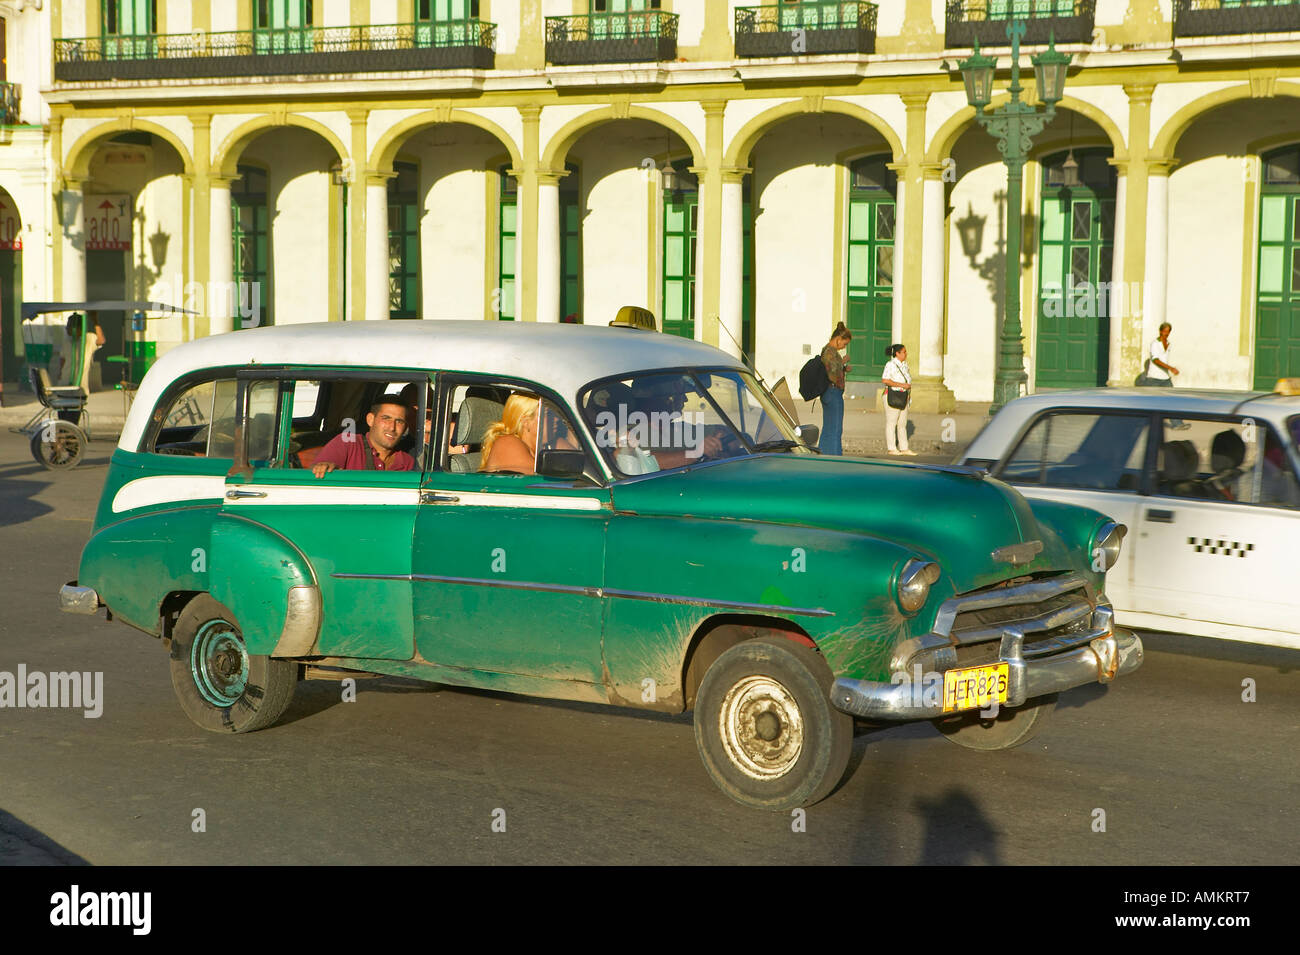 An old American green car and taxi driving through Old Havana Cuba Stock Photo